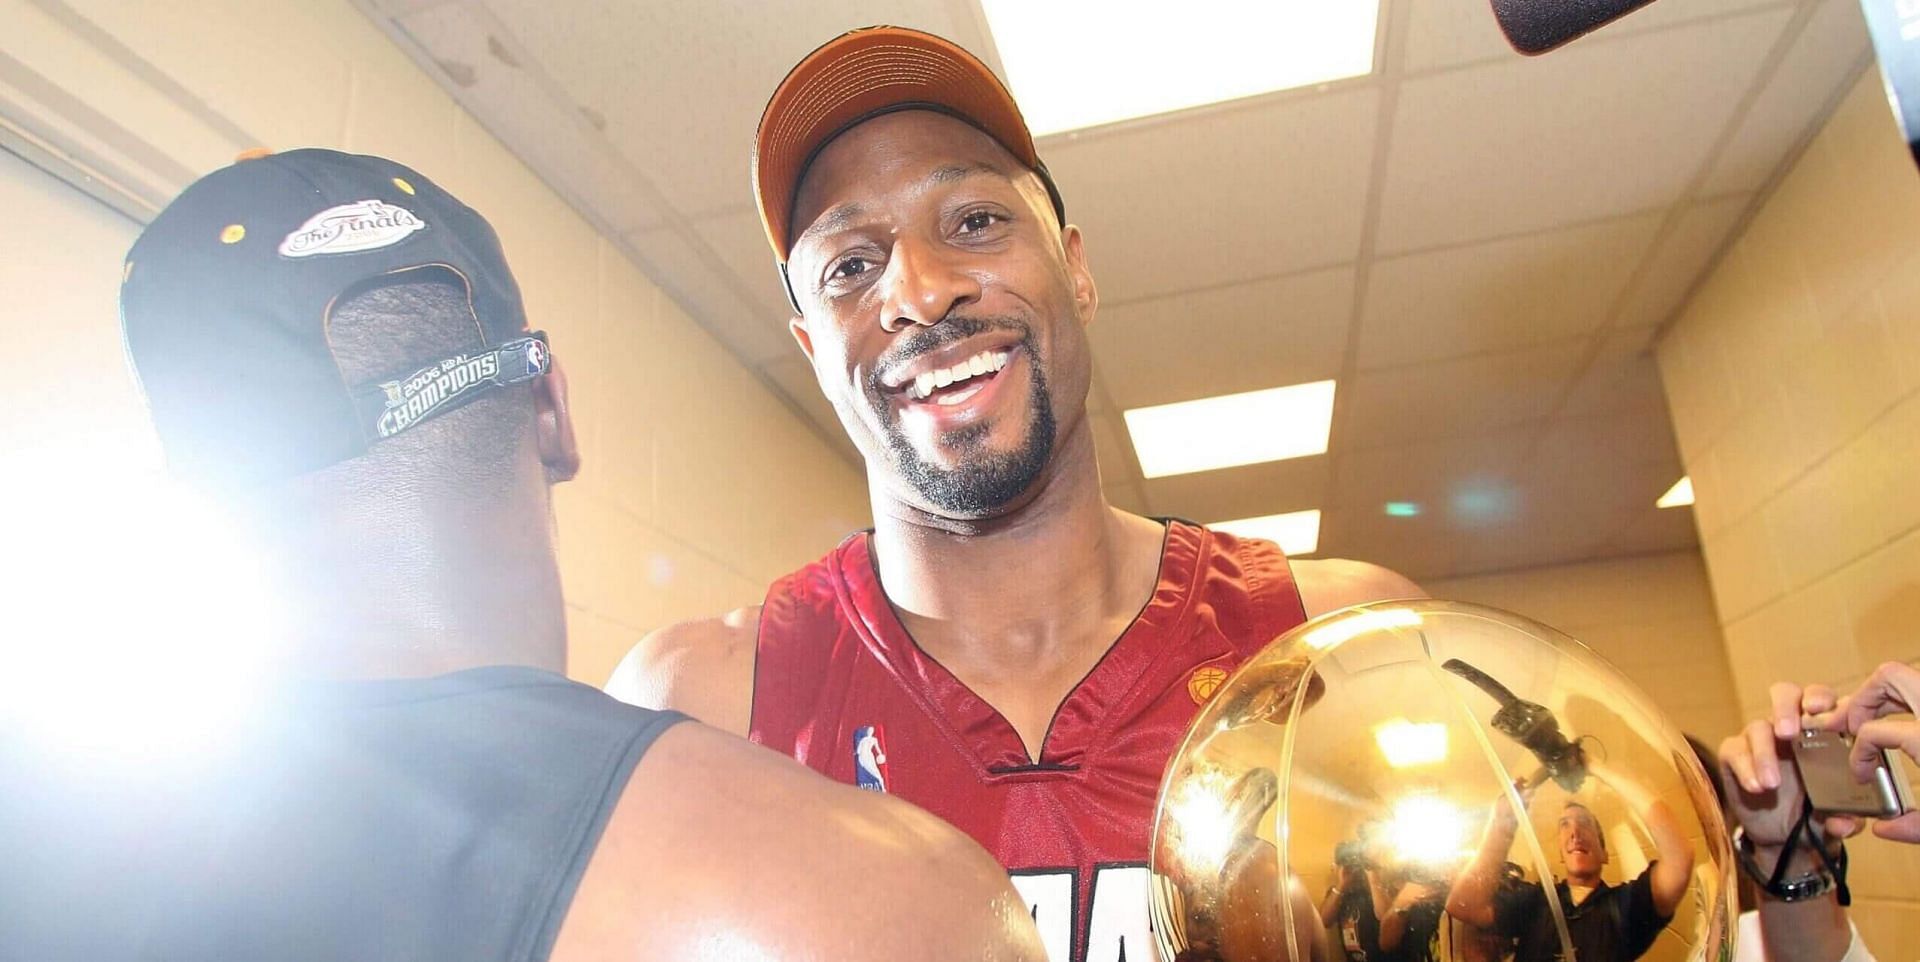 Alonzo Mourning became an NBA champion in 2006 with the Miami Heat. (Image via The Athletic)